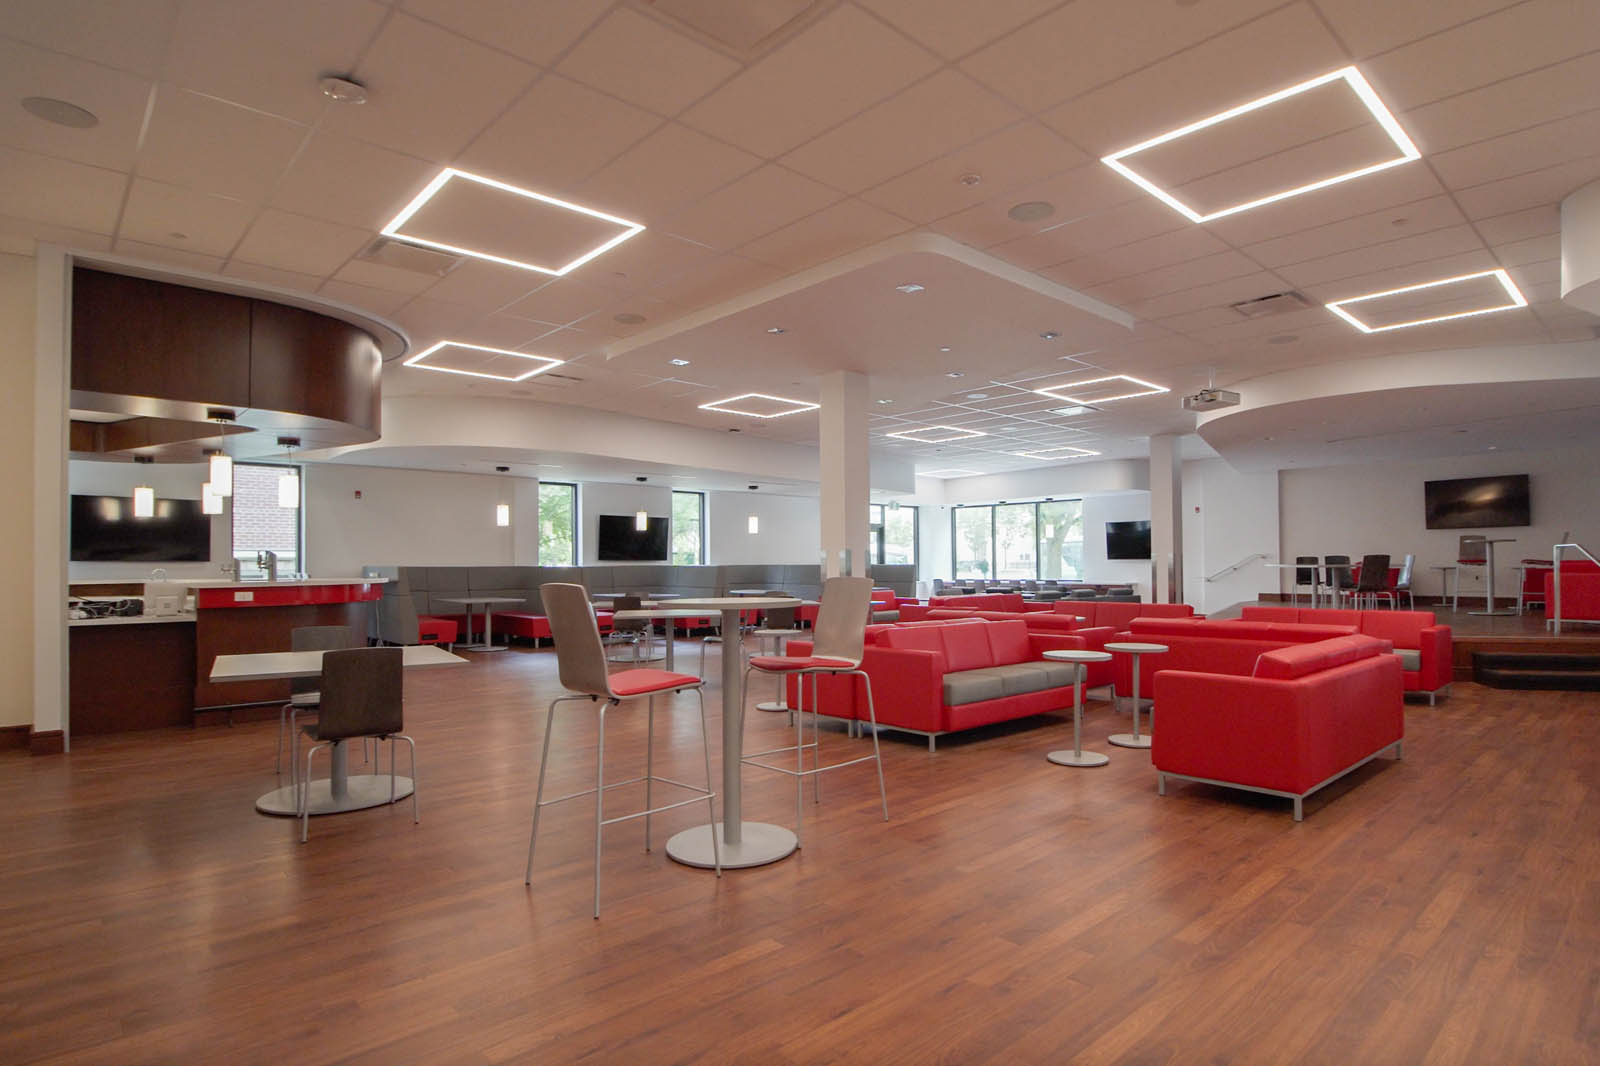 Modern student commons area with a bar, booths, tables, lounge seating and a small corner stage